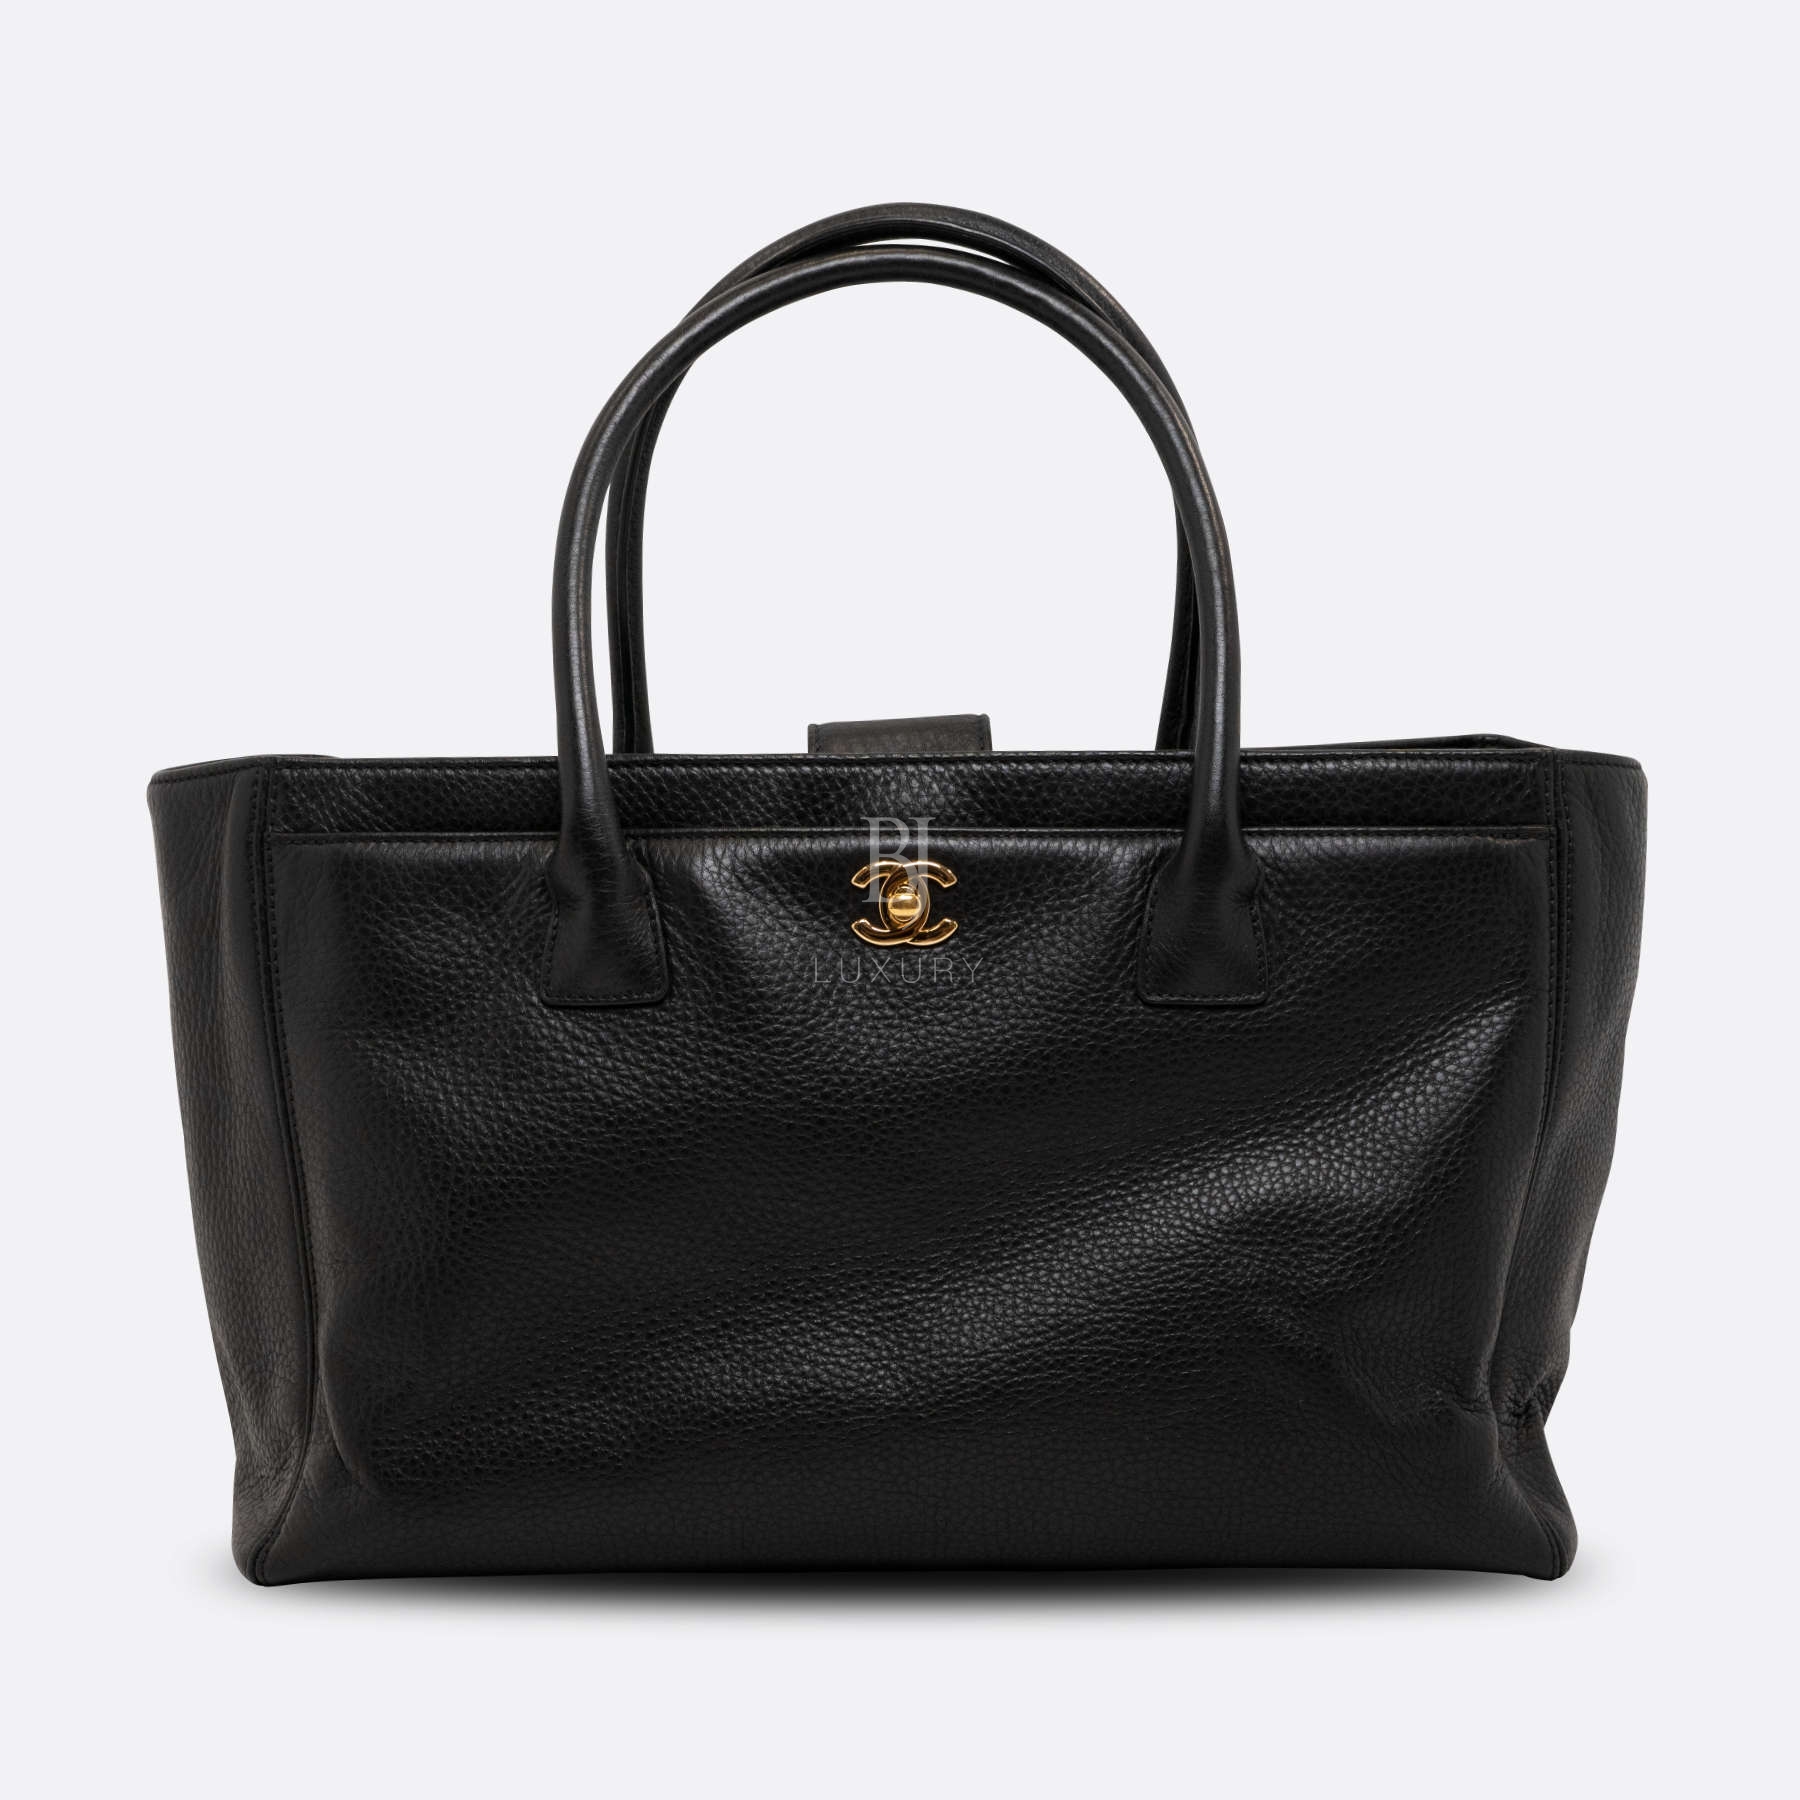 CHANEL-TOTE-LARGE-BLACK-CALF-4287 front.jpg